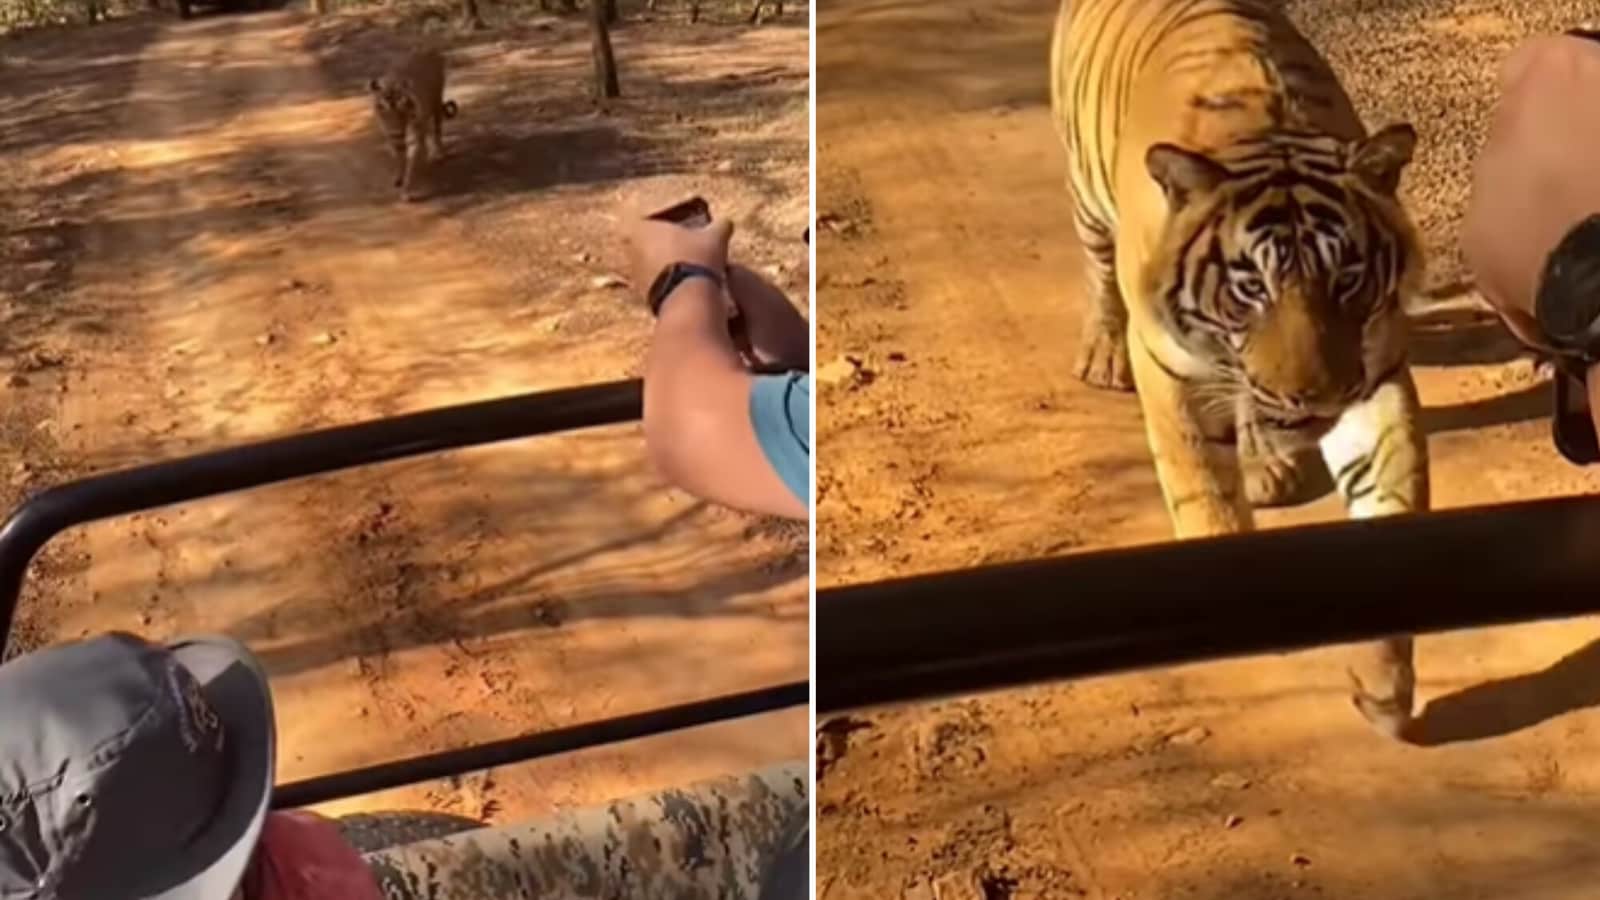 Tourists scream, shout as tiger comes extremely close to their safari vehicle. Watch